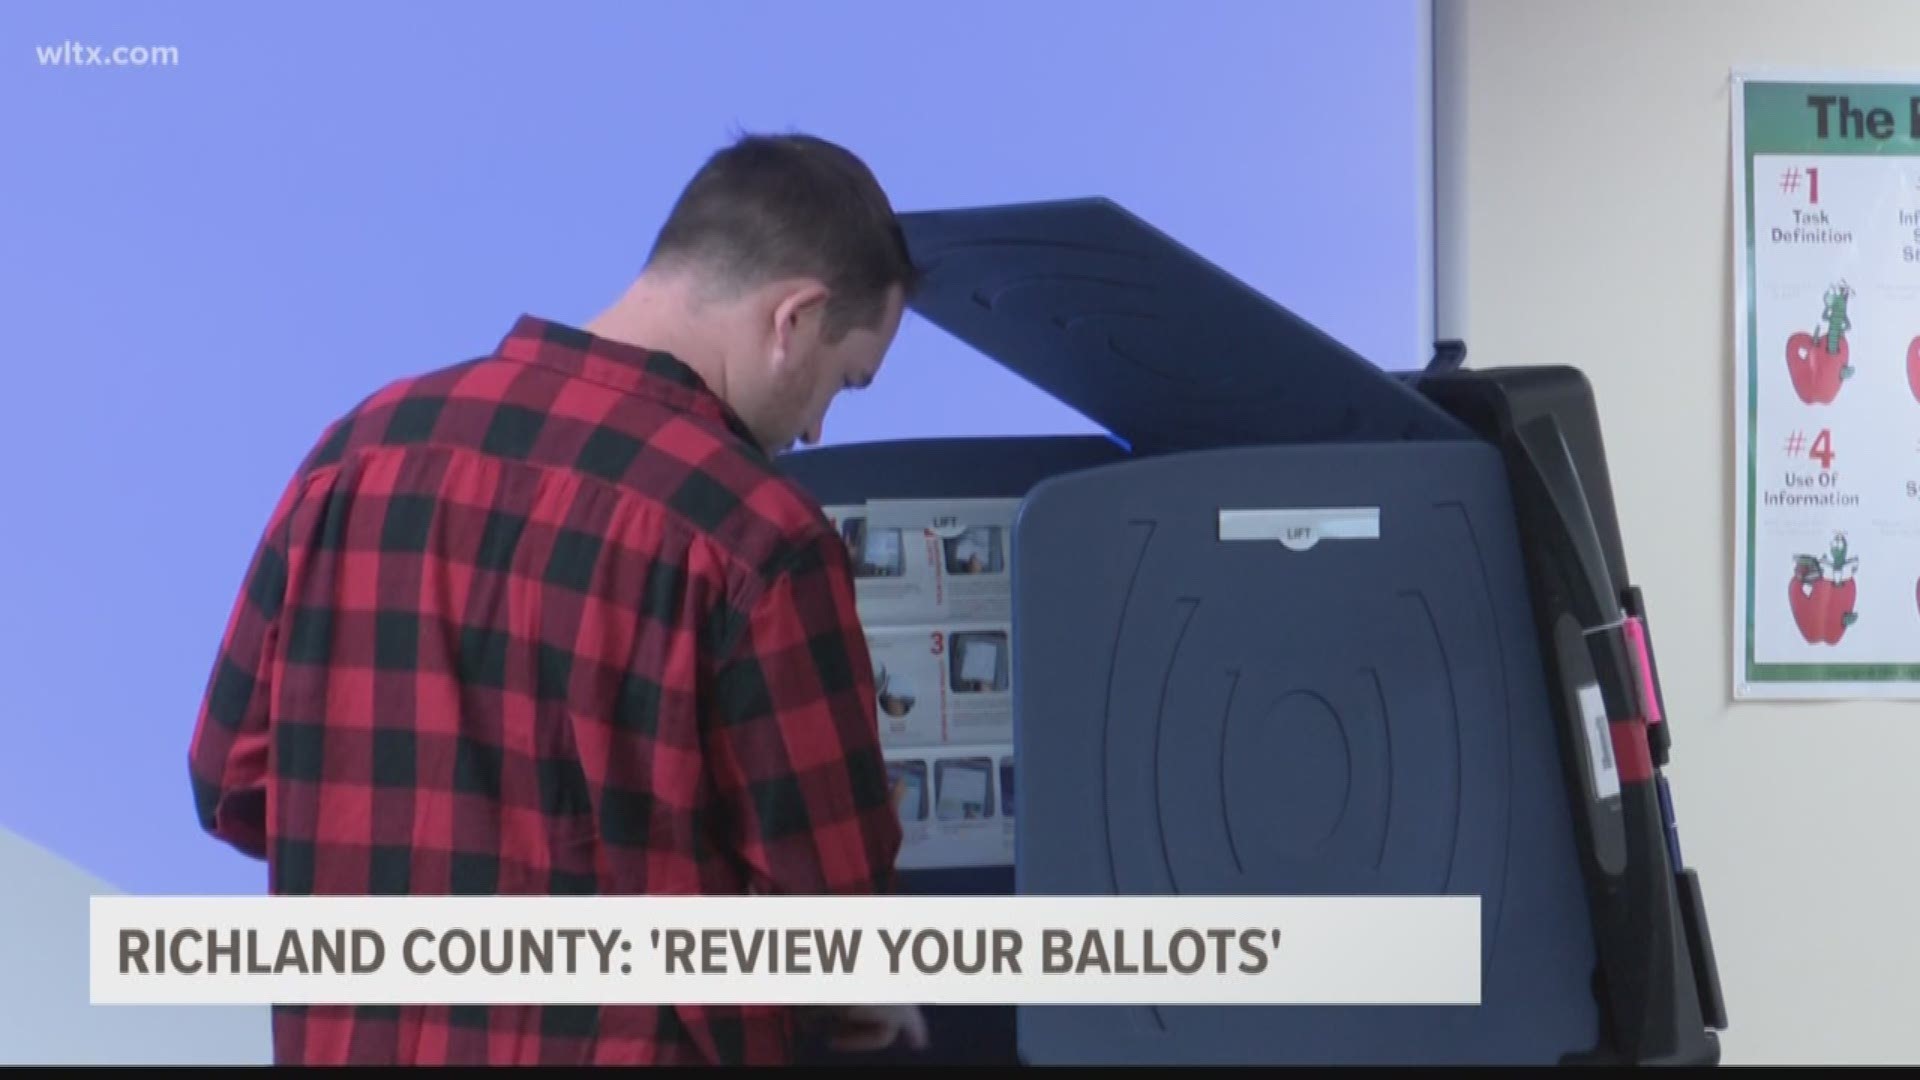 Due to some problems with some voting machines, voters are being asked to double-check their ballots when they vote.